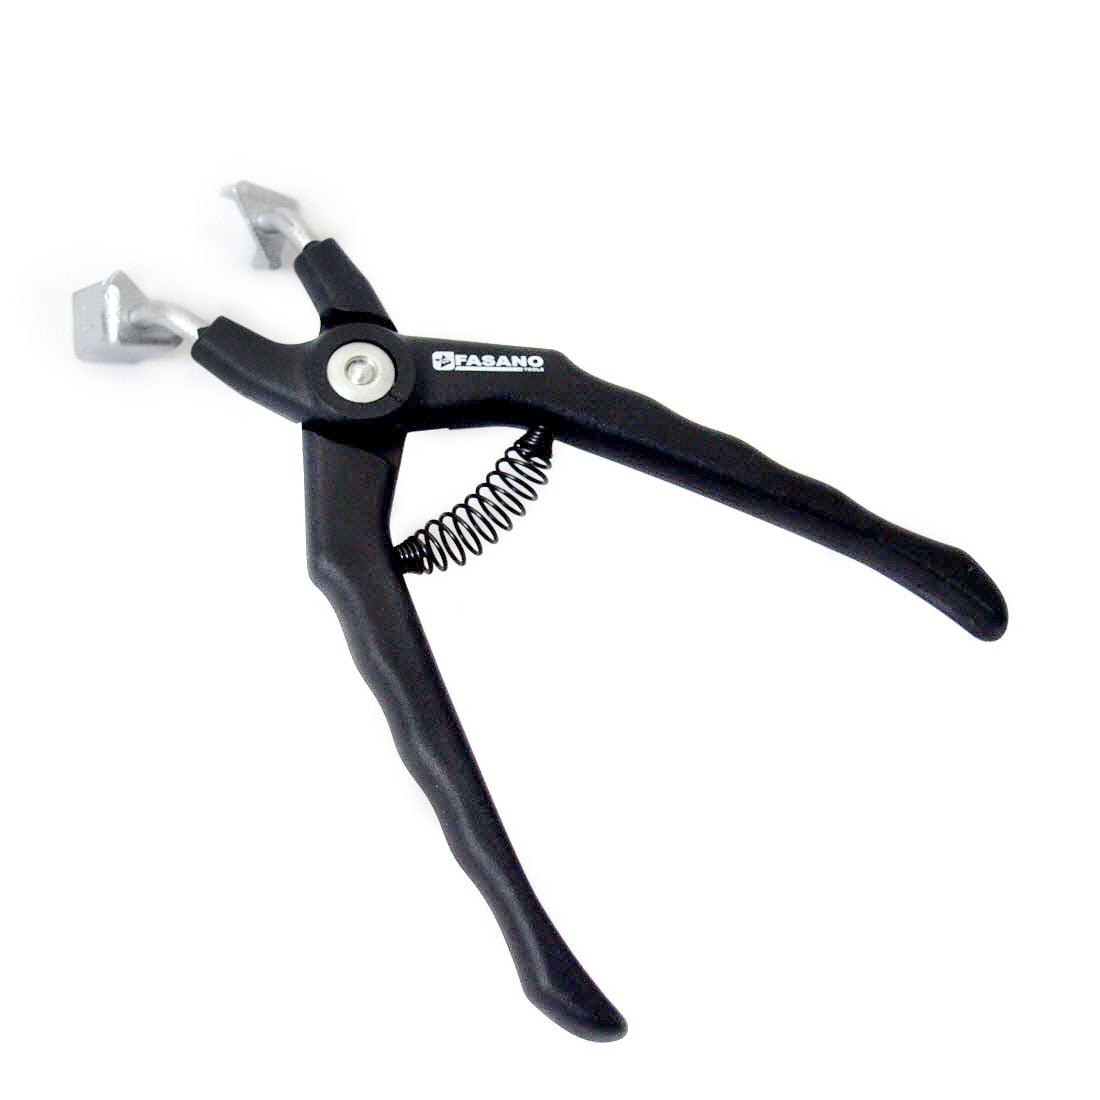 Relay removal pliers , 60 degree jaws, fasano